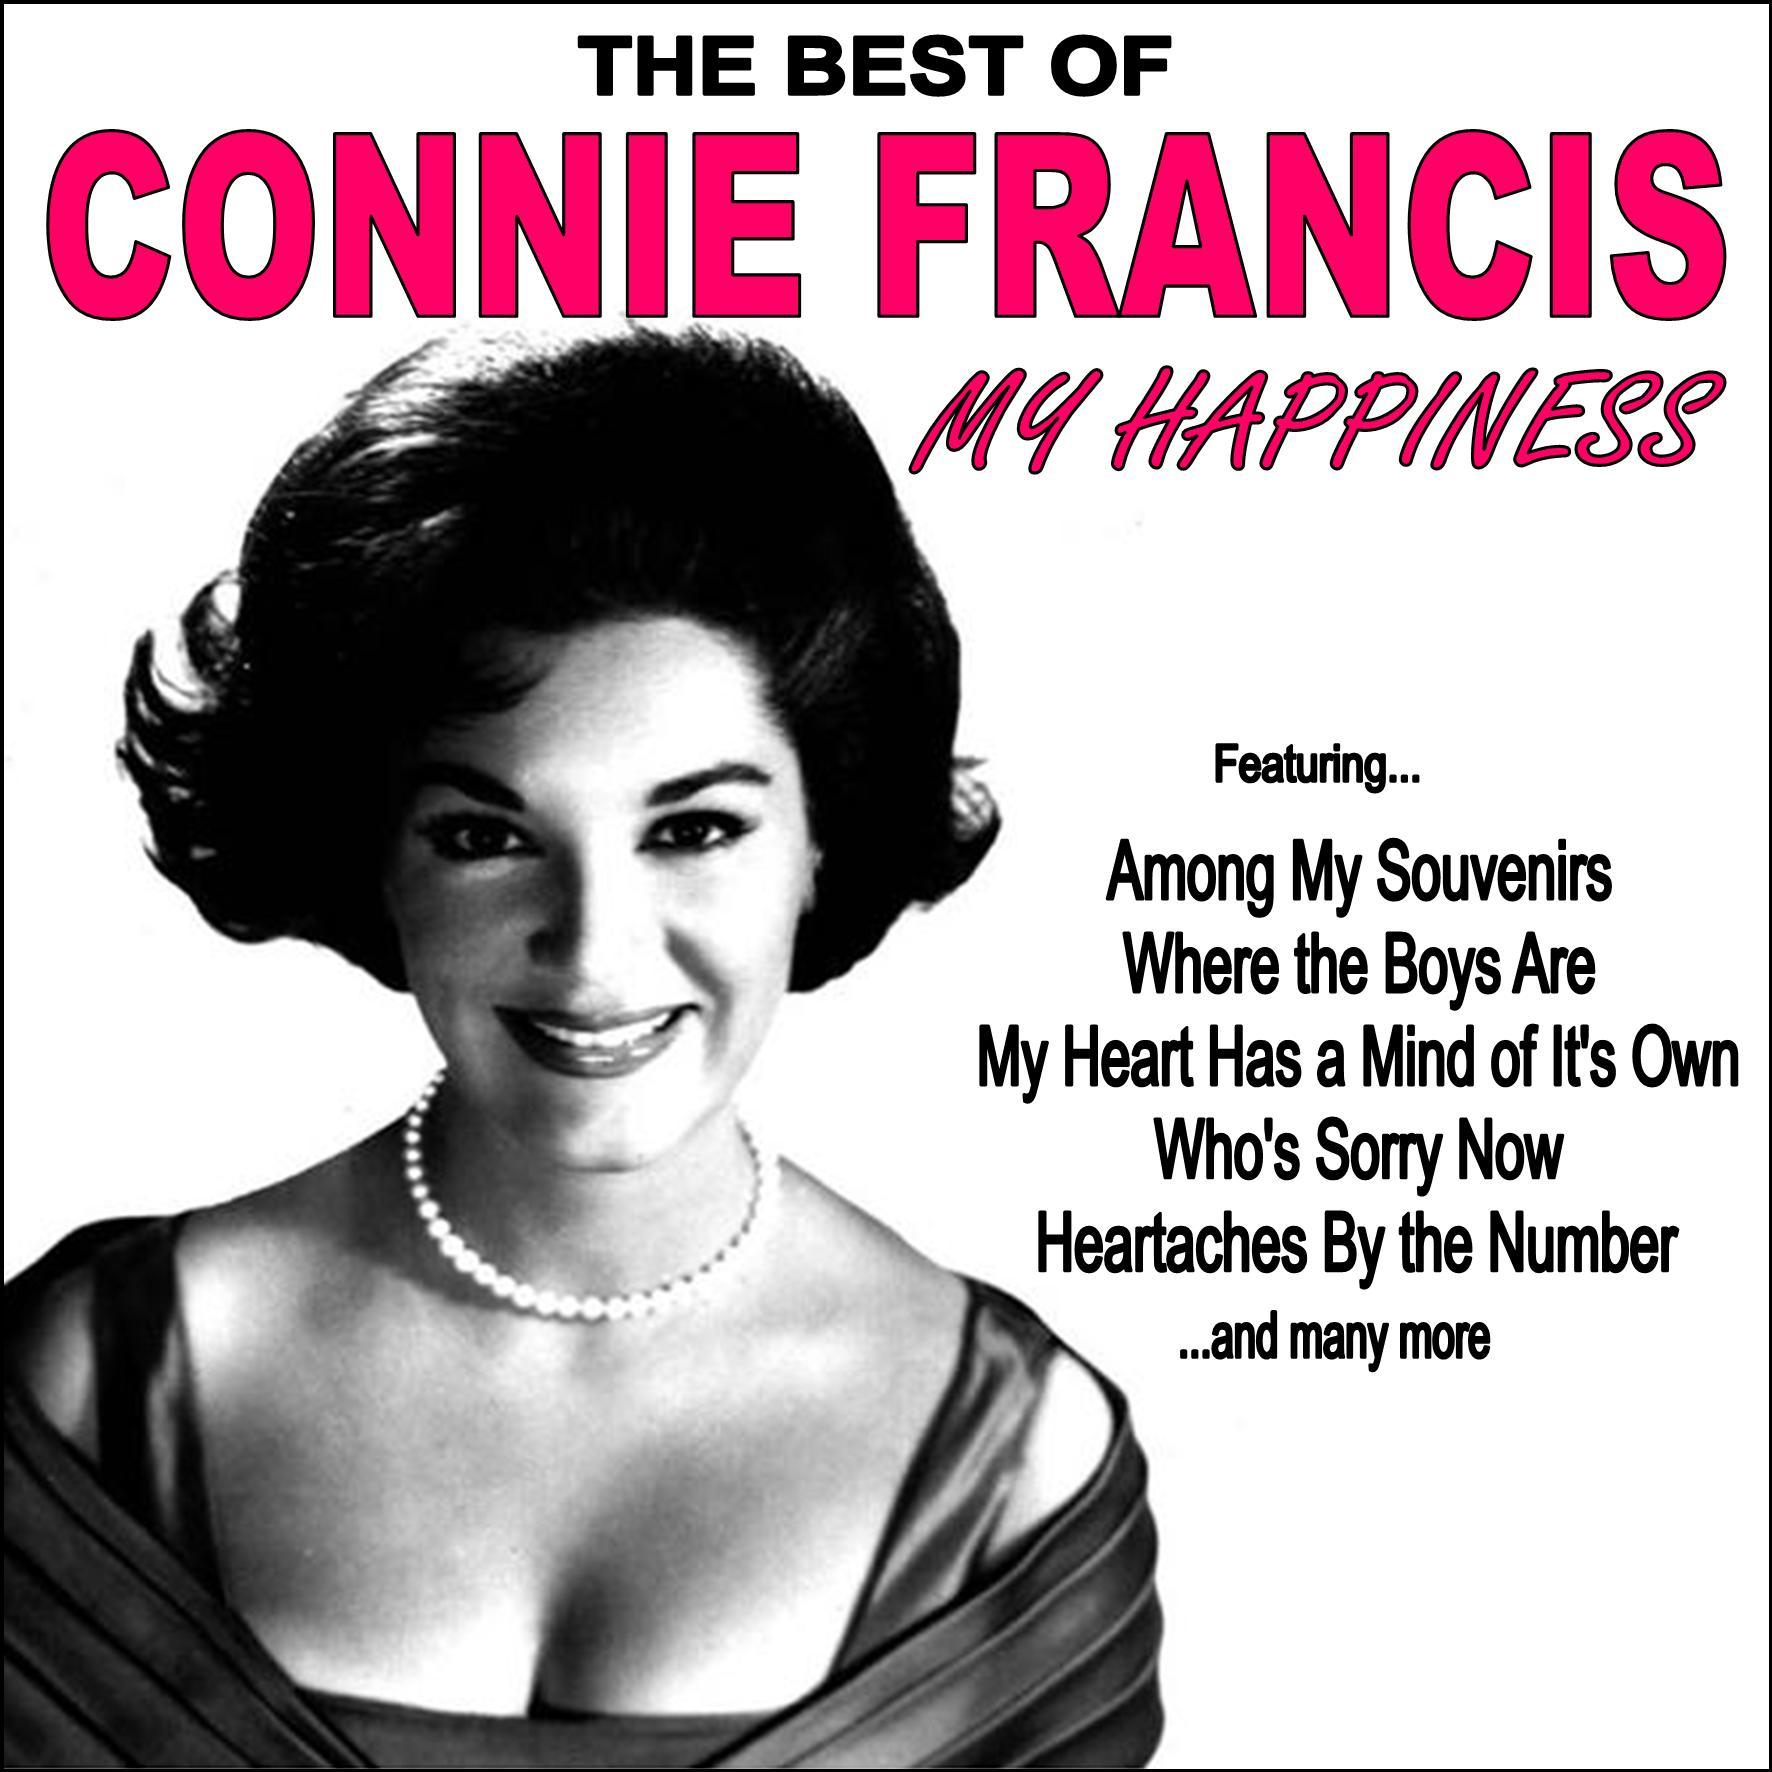 My Happiness: The Best of Connie Francis